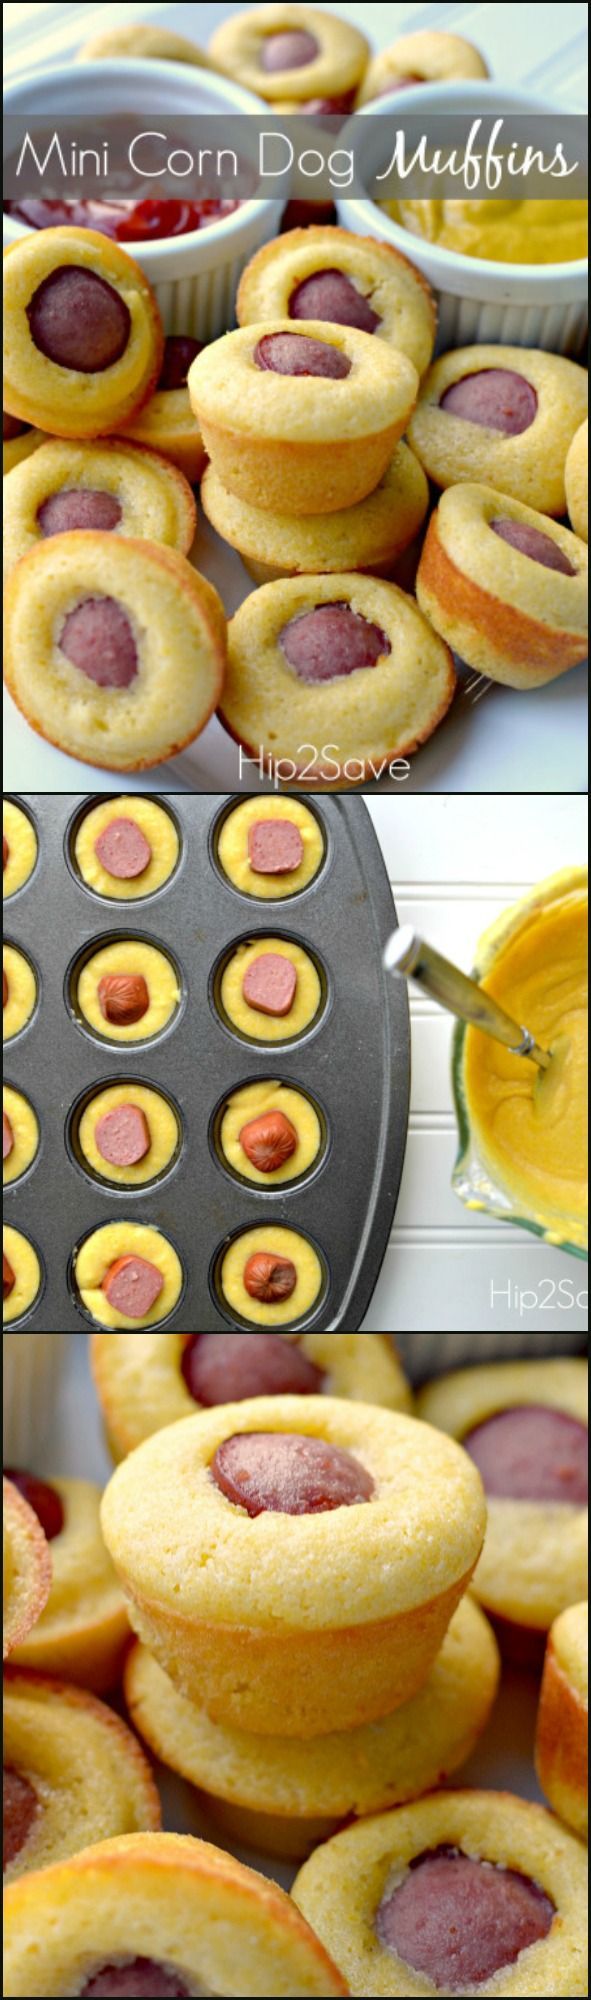 Enjoy these delicious and easy to make corn dog muffins. Great appetizers for parties, or when the kids are craving a snack.